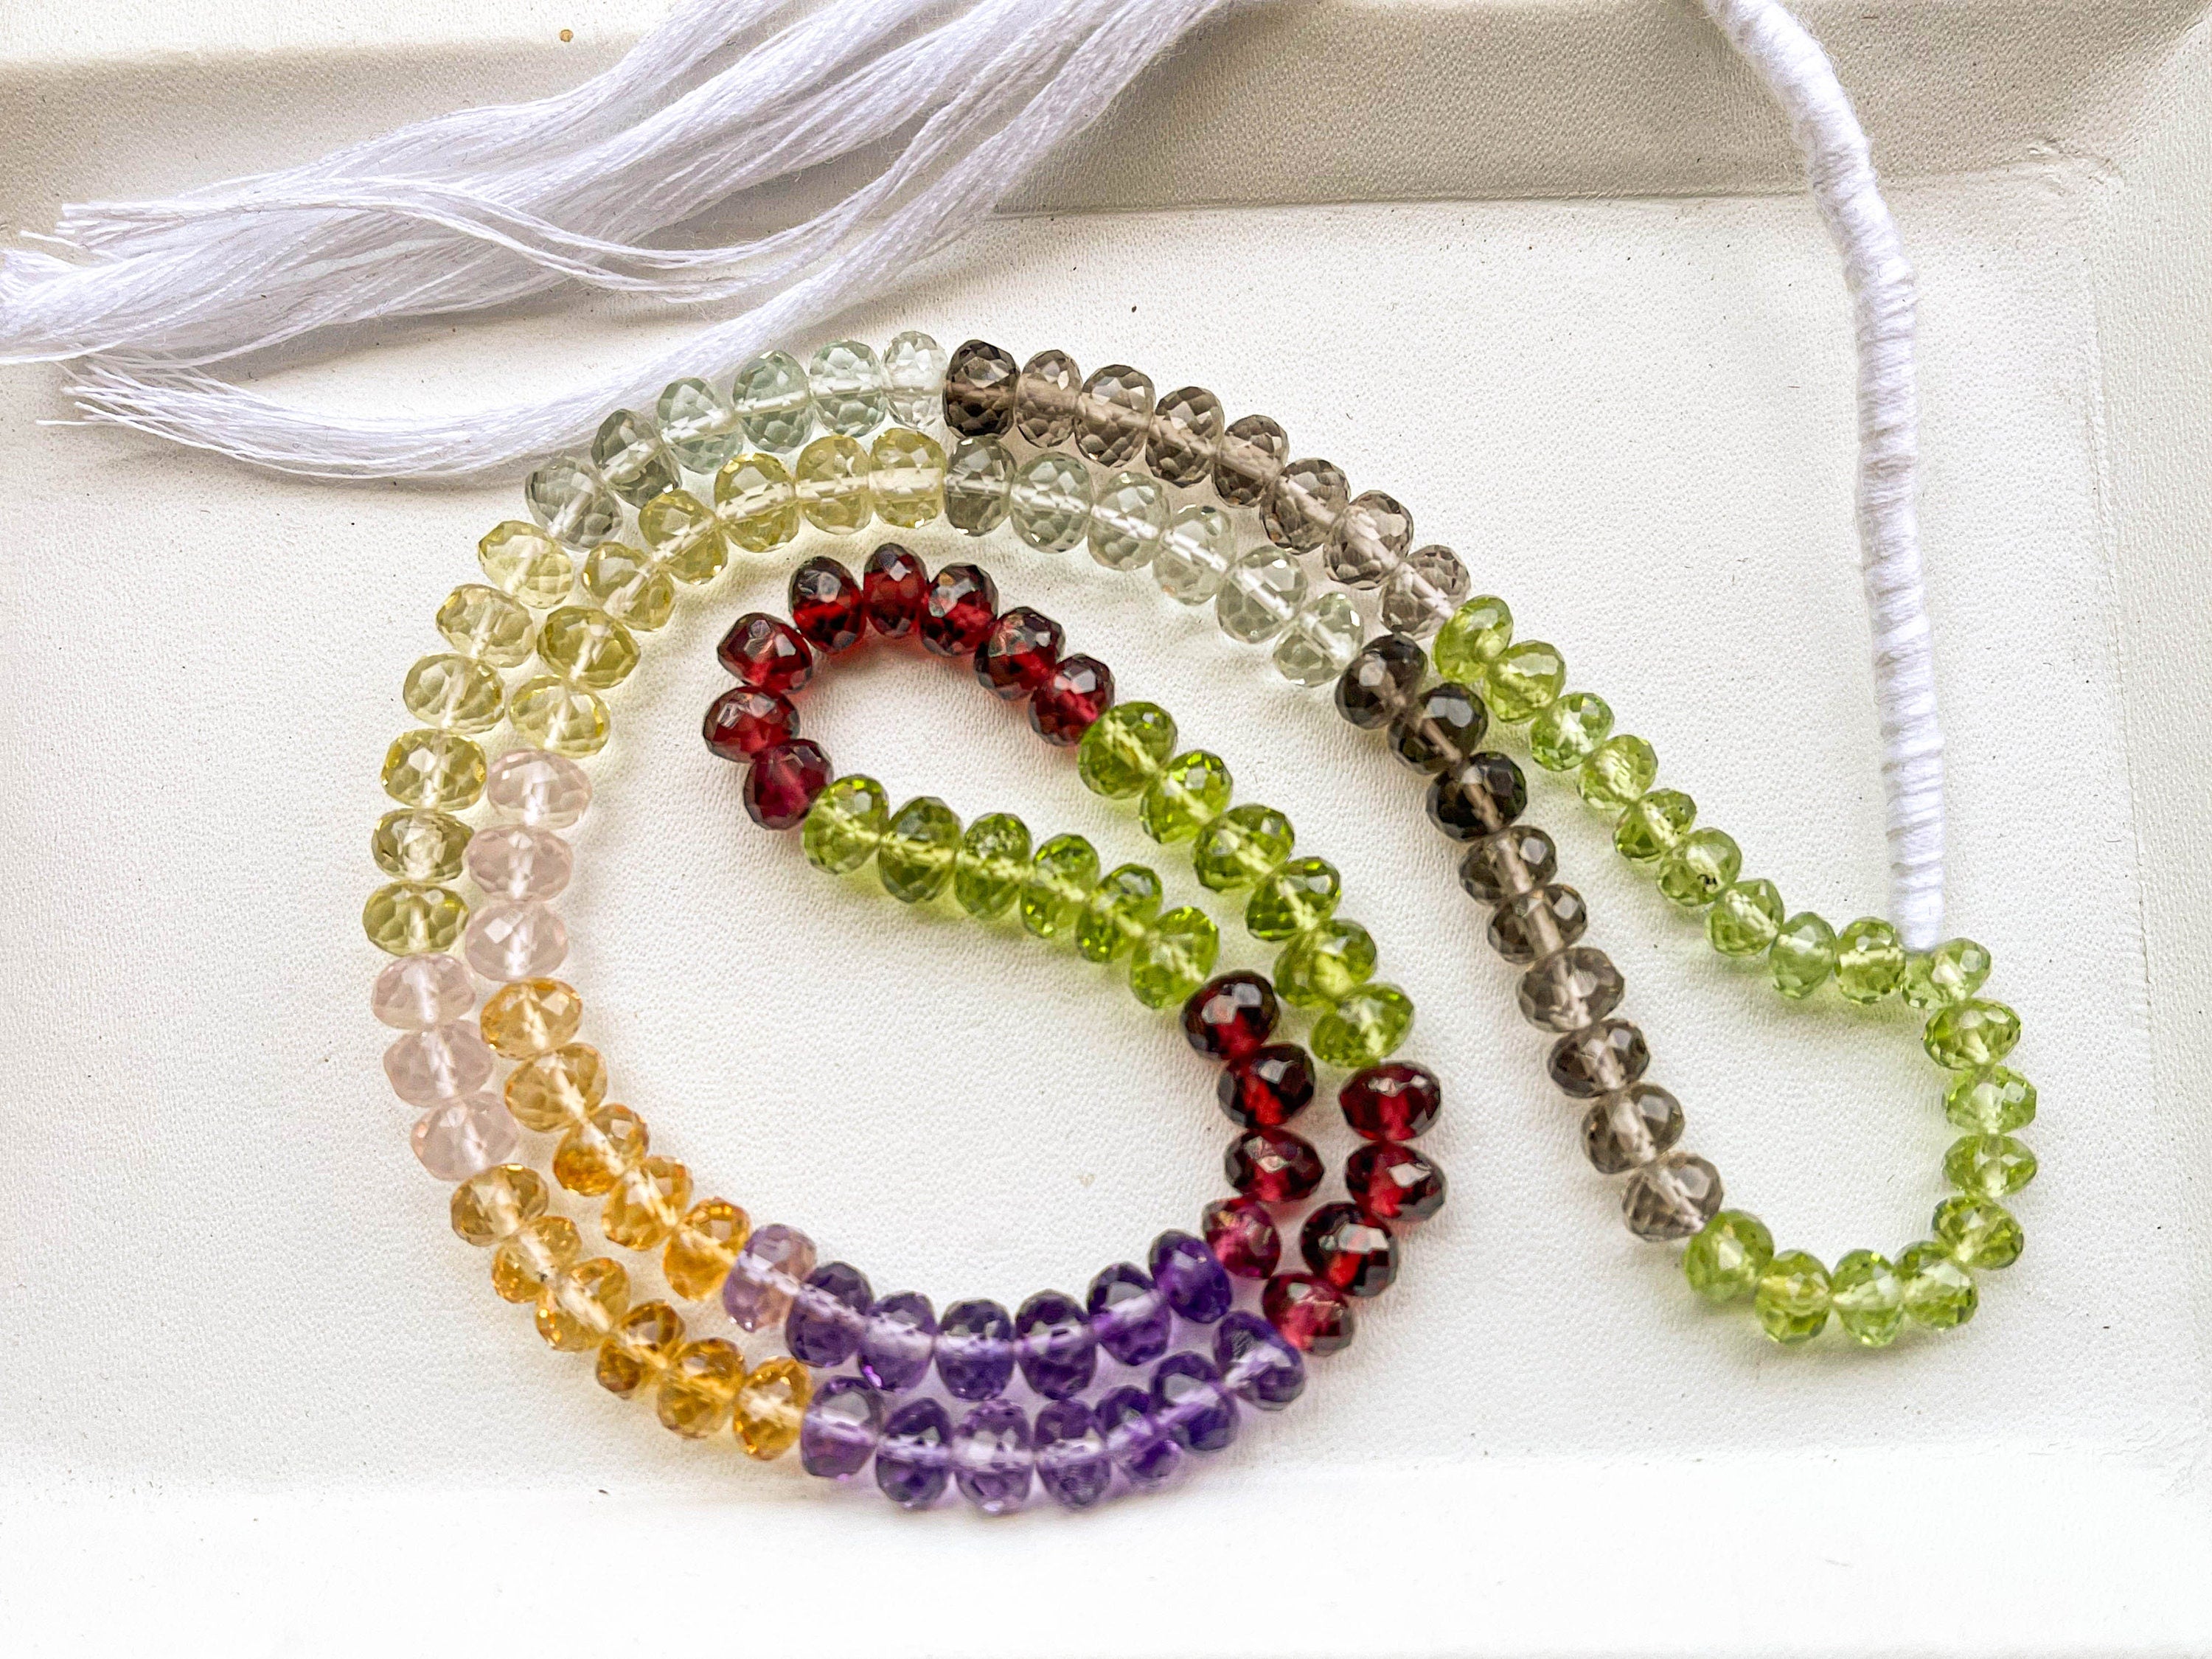 18" MULTIPLE GEMSTONE Beads Faceted Rondelle Shape, Natural Gemstone Beads, 5 mm, Faceted Gemstone Beads for jewelry making - Beadsforyourjewelry